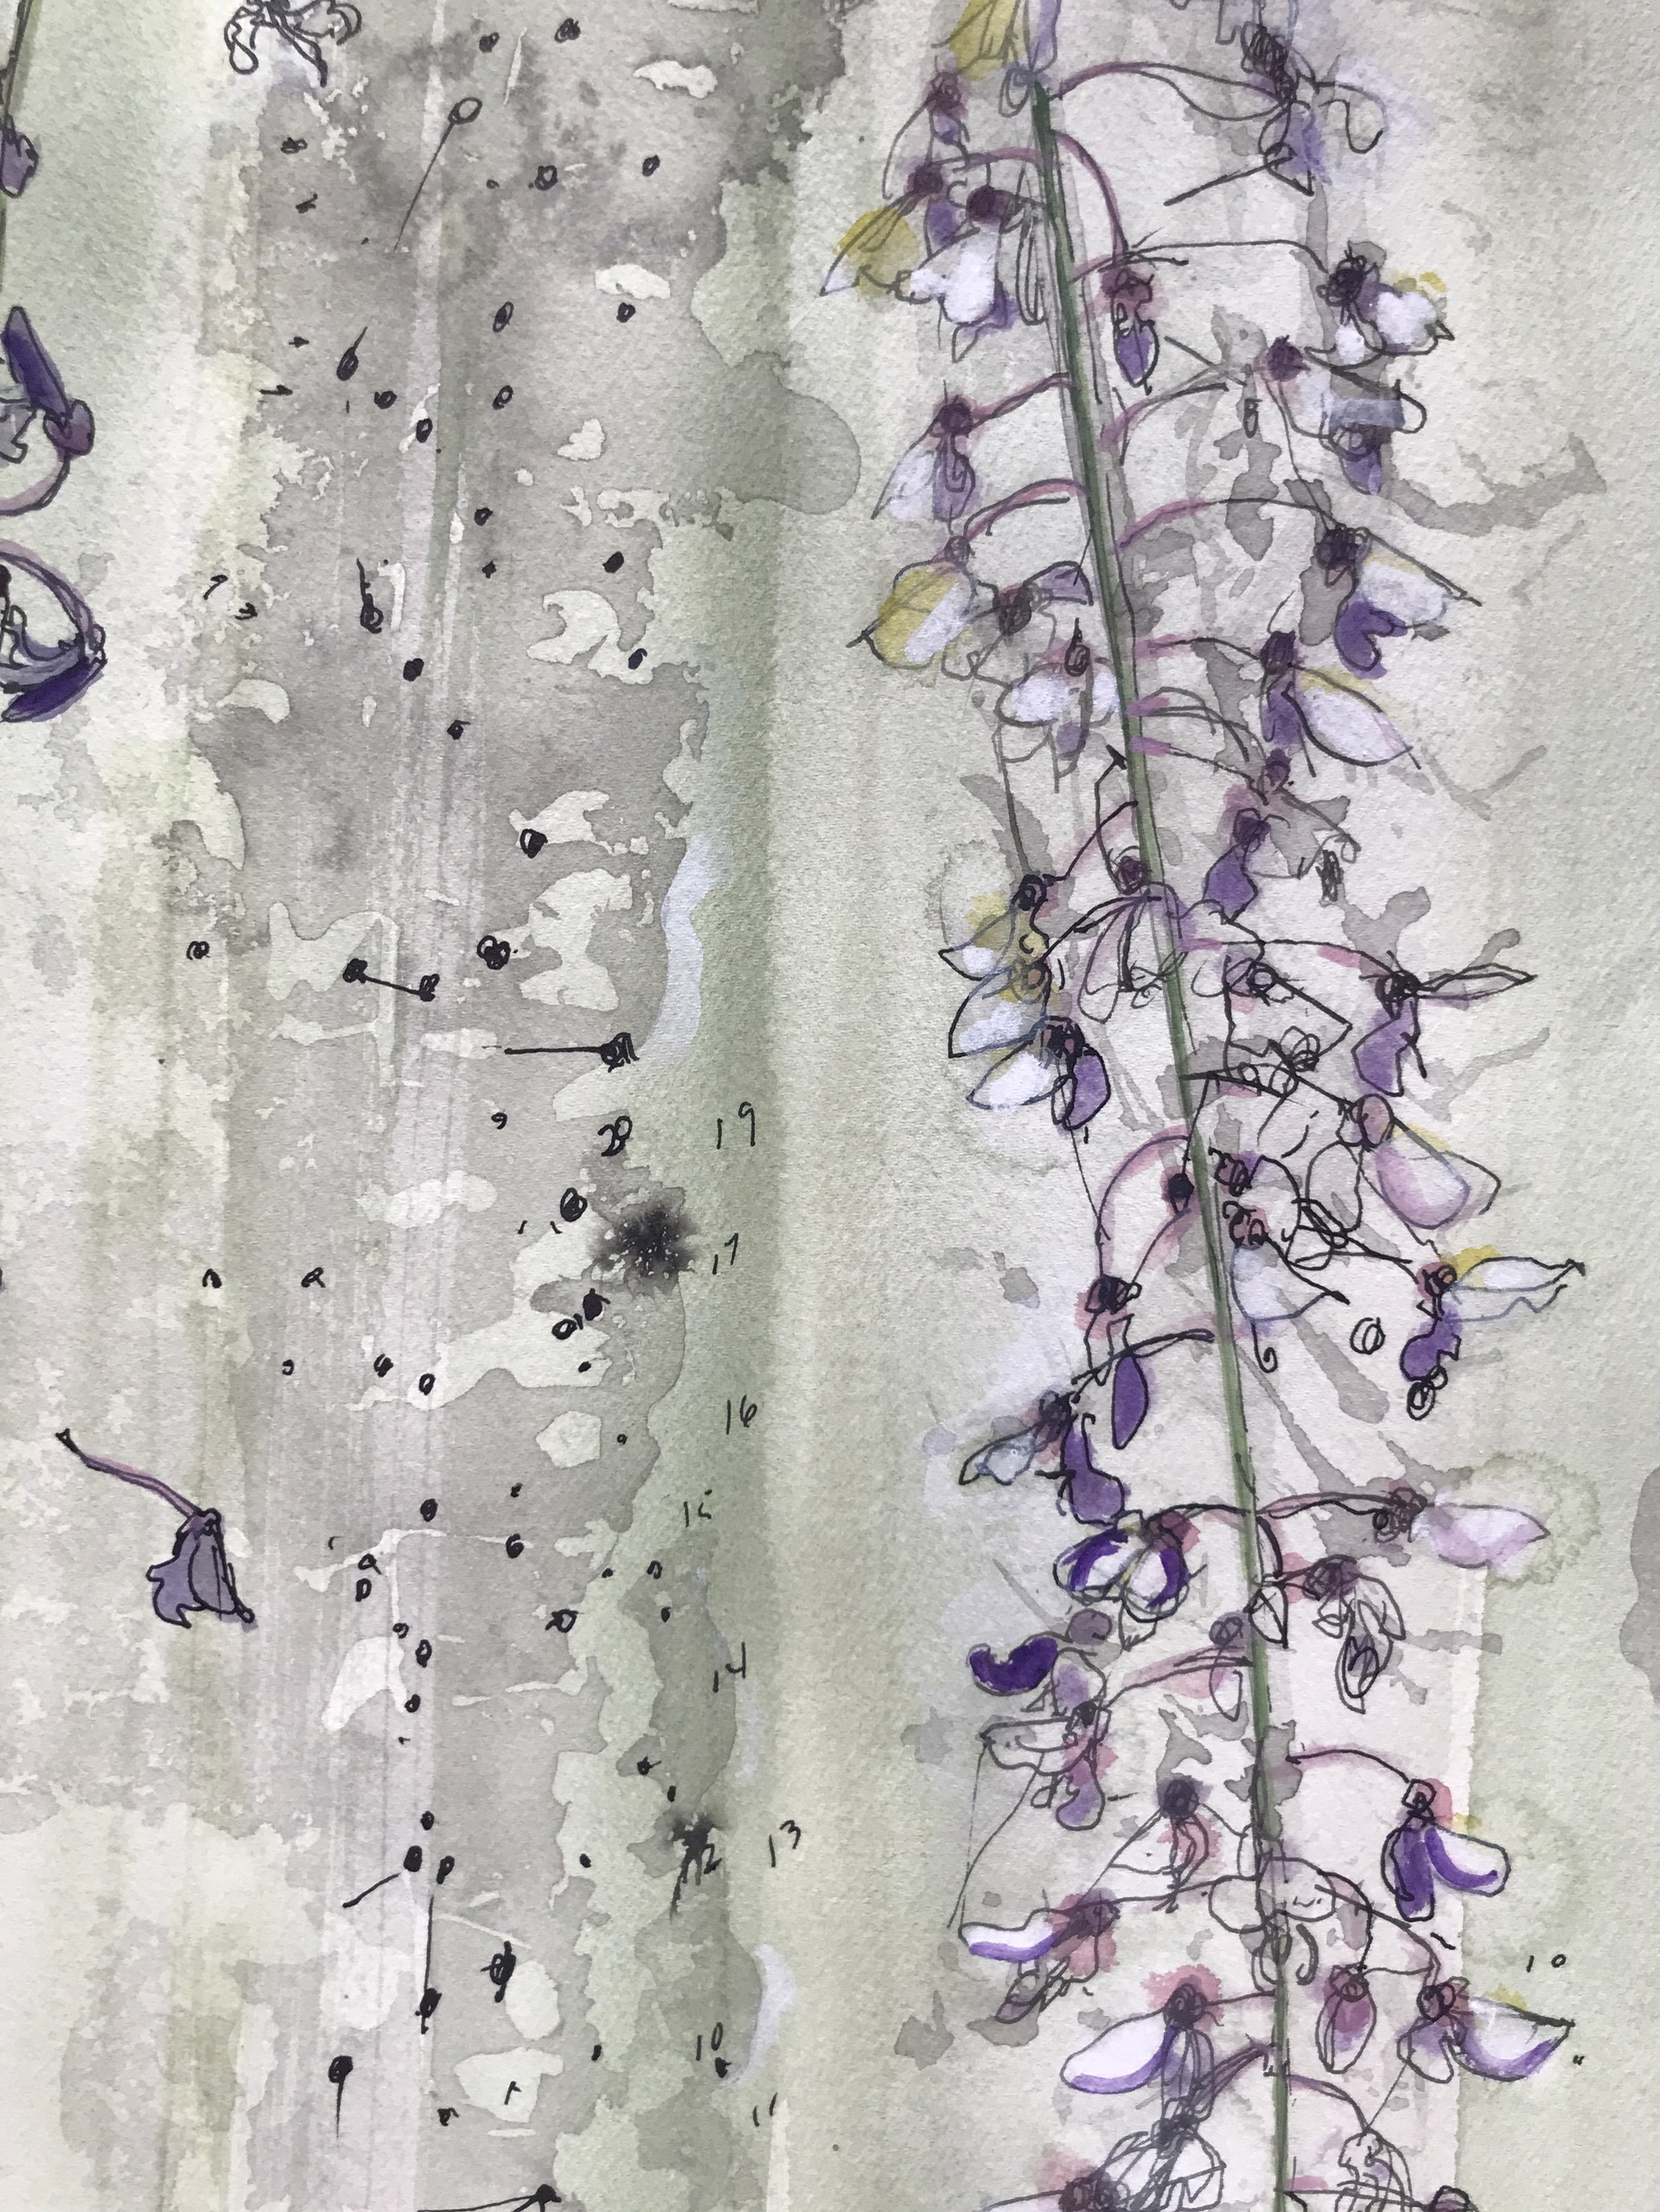 My Wisteria, Venice, 2023: Racemes in full bloom, withering, blossom fall, new seedpods, plotting the structure.  (W. japonica floribunda macrobotrys.) by Amy Worthen